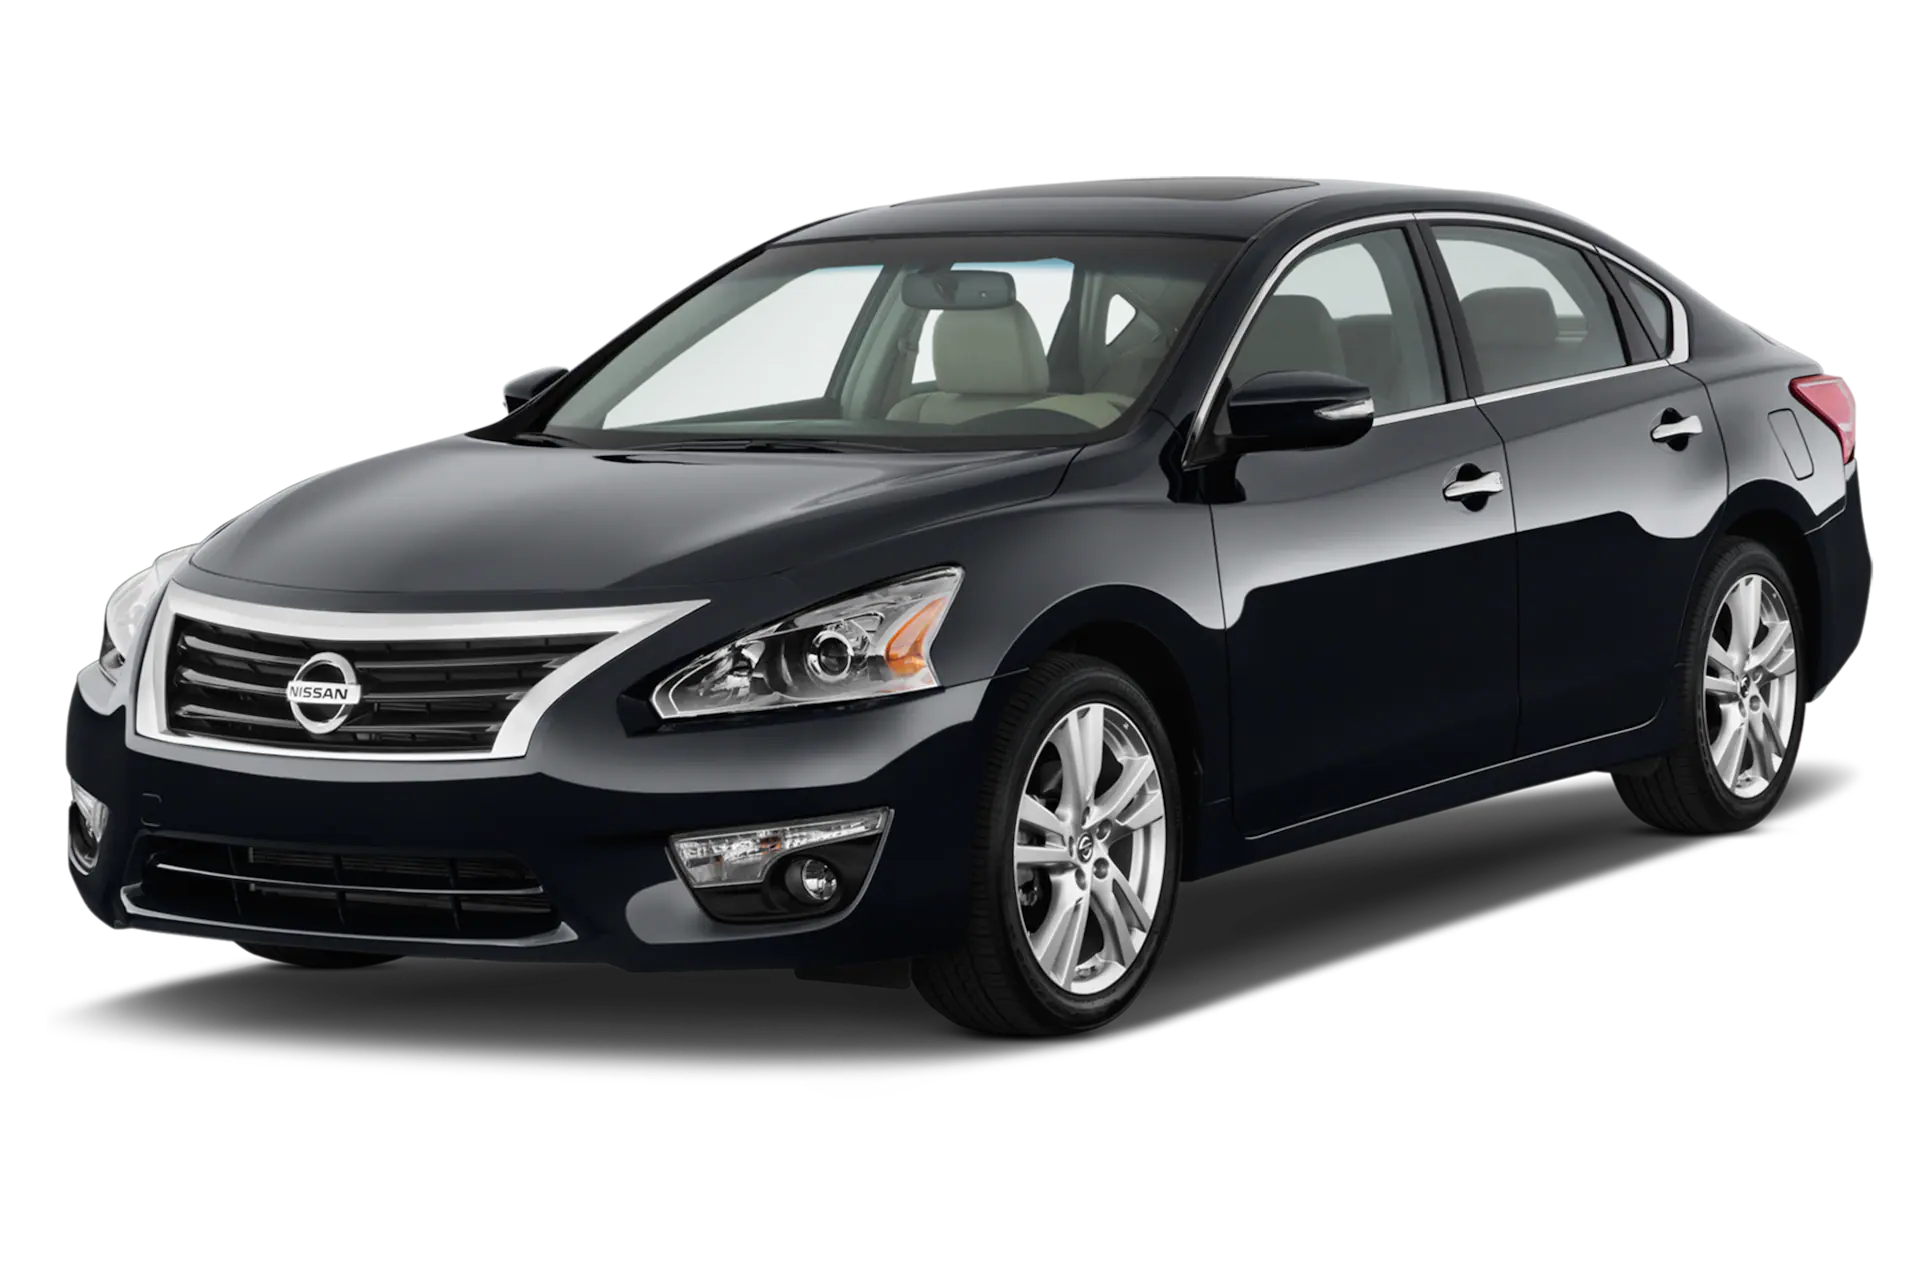 Car Reivew for 2013 Nissan Altima